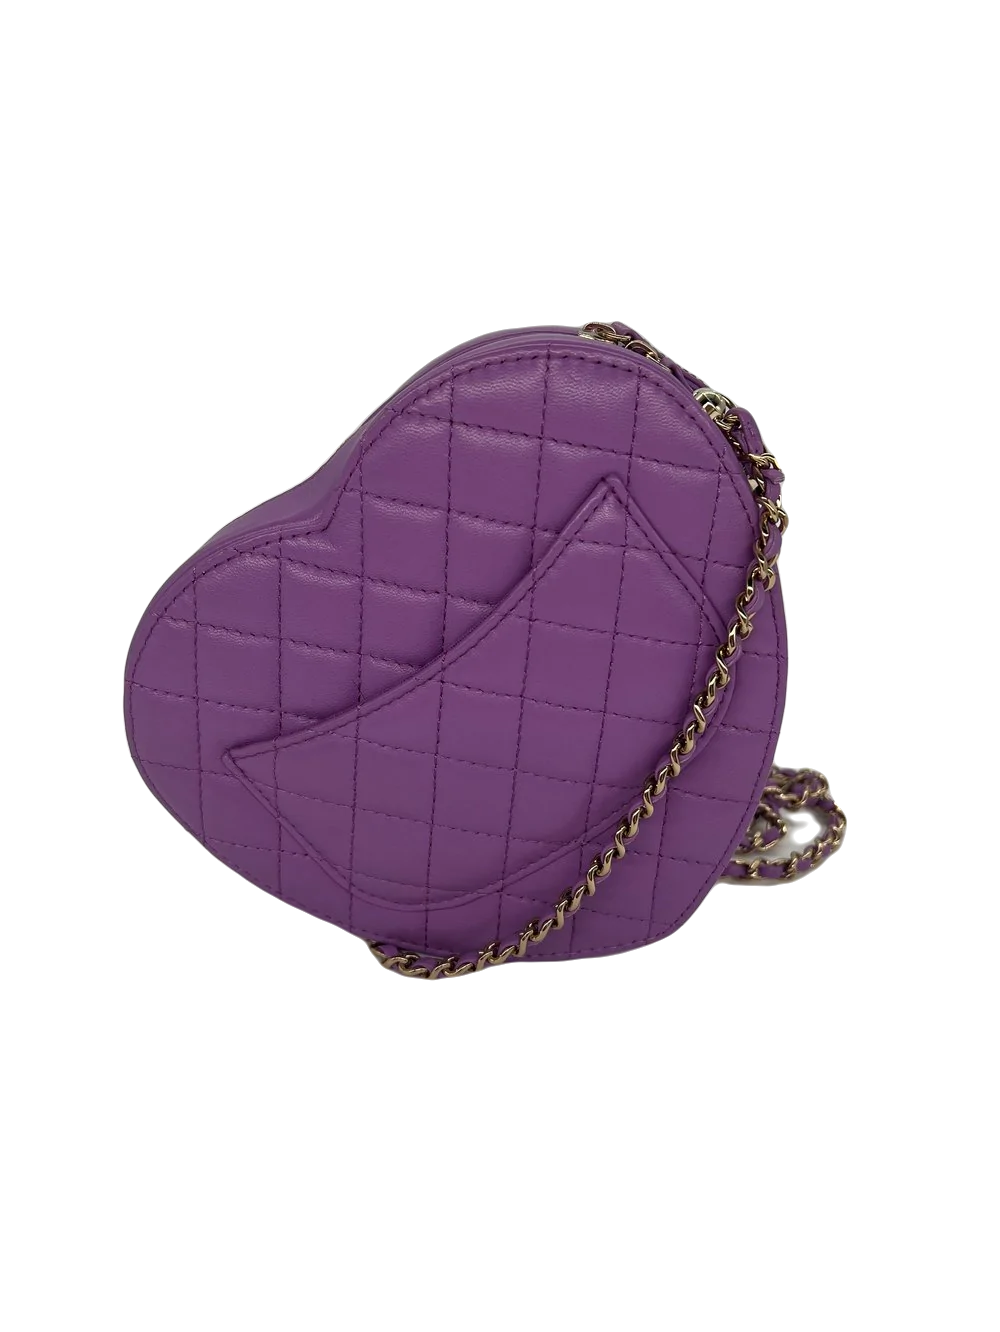 Chanel Heart Bag Large - Purple CGHW - SOLD